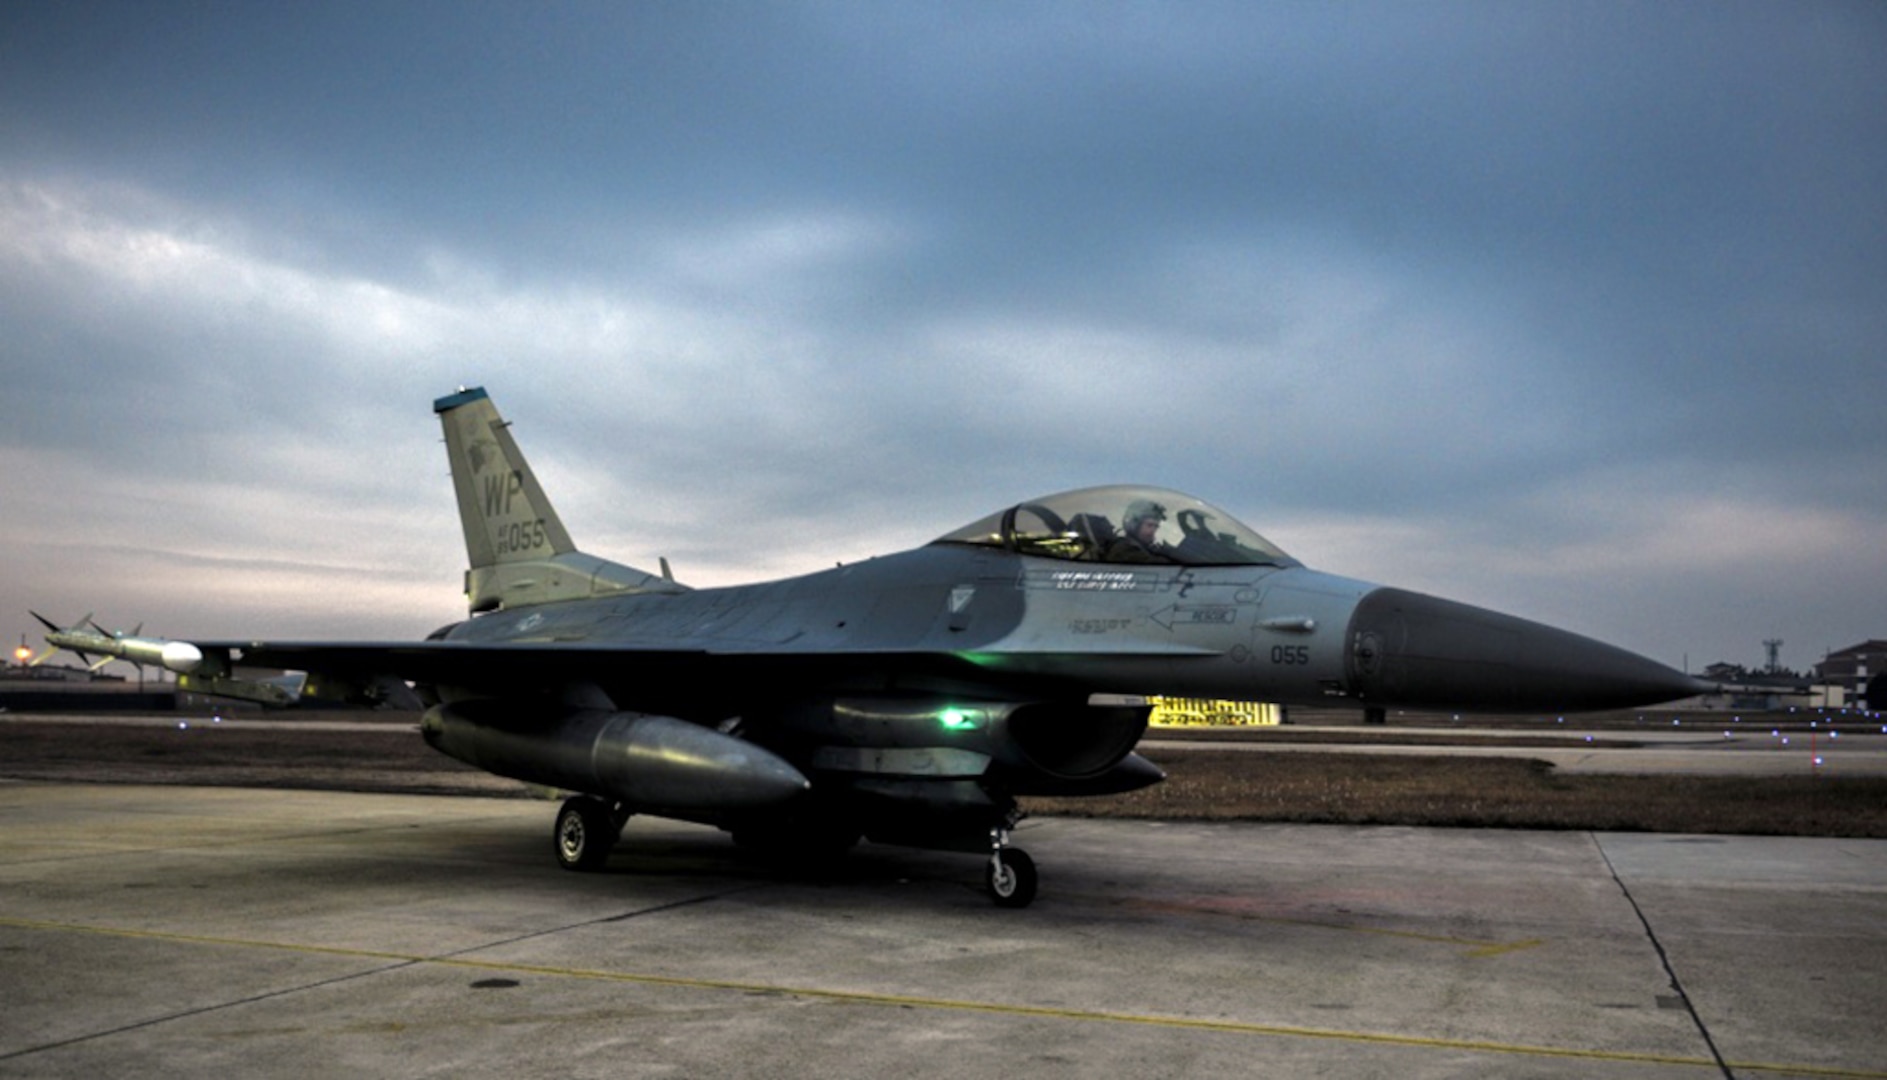 In this file photo, U.S. Air Force Capt. Erik Kitaif, 35th Fighter Squadron pilot, parks an F-16 Fighting Falcon outside of its hanger bay at Kunsan Air Base, Republic of Korea, Dec. 4, 2016. This large-scale employment exercise increases U.S. and ROK interoperability and ultimately enhances U.S. and ROK commitments to maintain peace in the region.